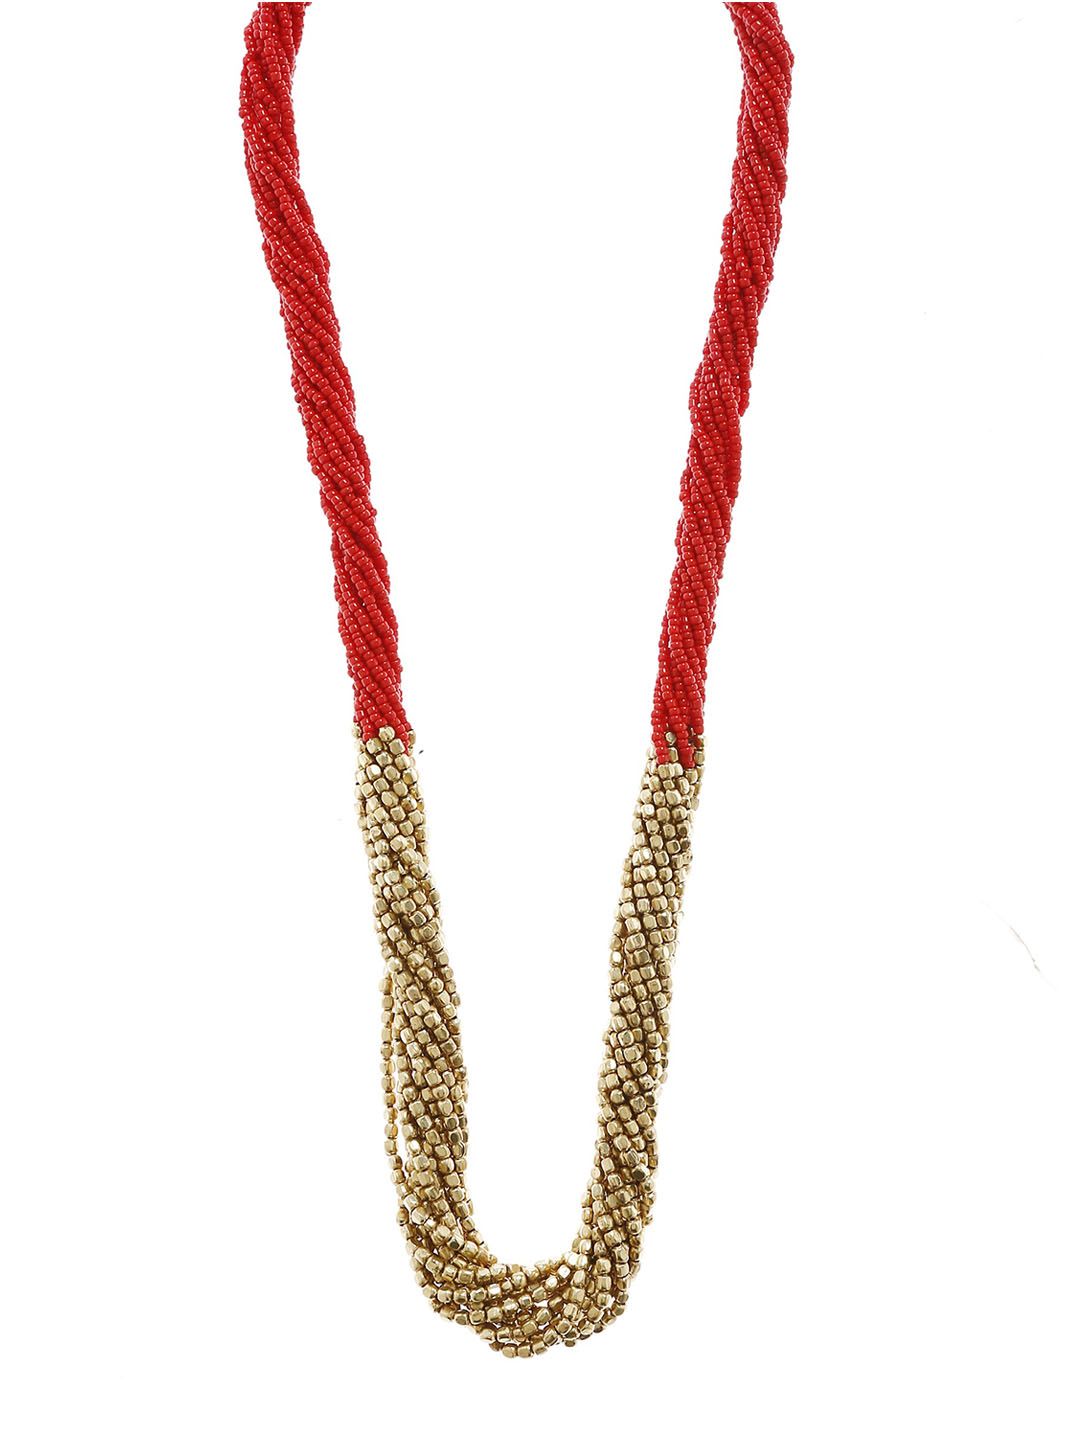 Bamboo Tree Jewels Red & Gold-Toned Metal Handcrafted Necklace Price in India